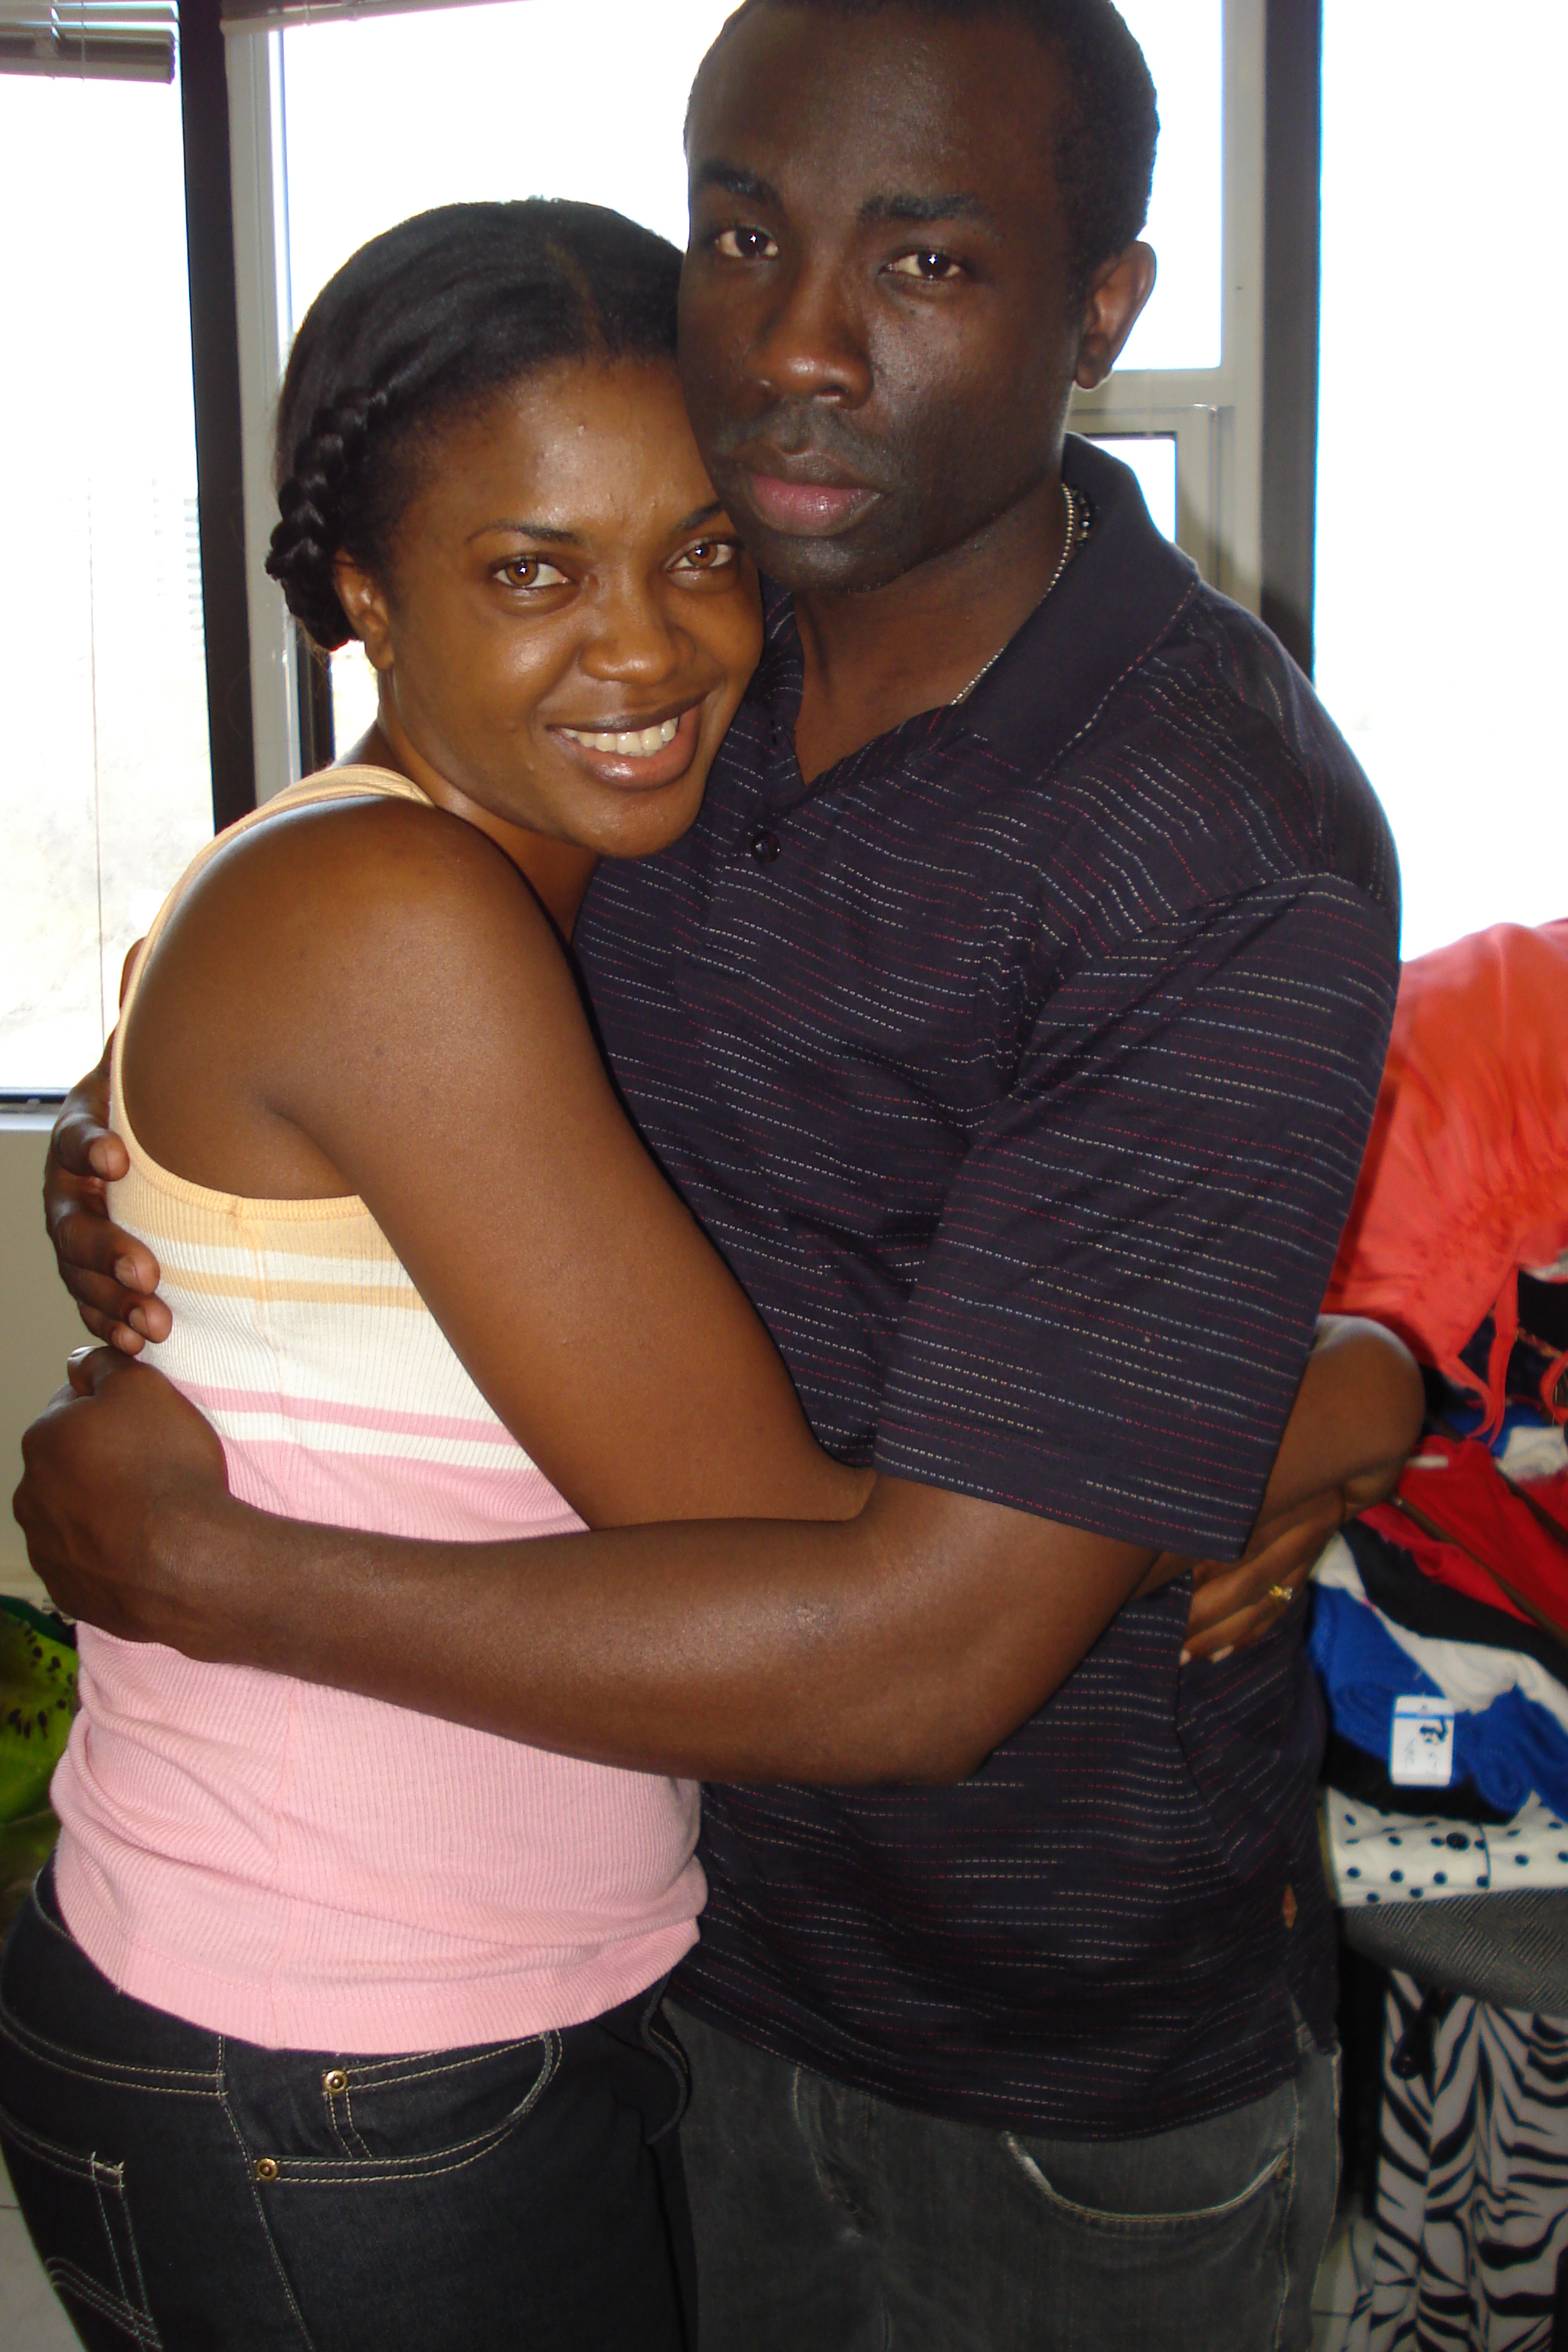 on set of 'Anchor baby' with Sam Sarpong